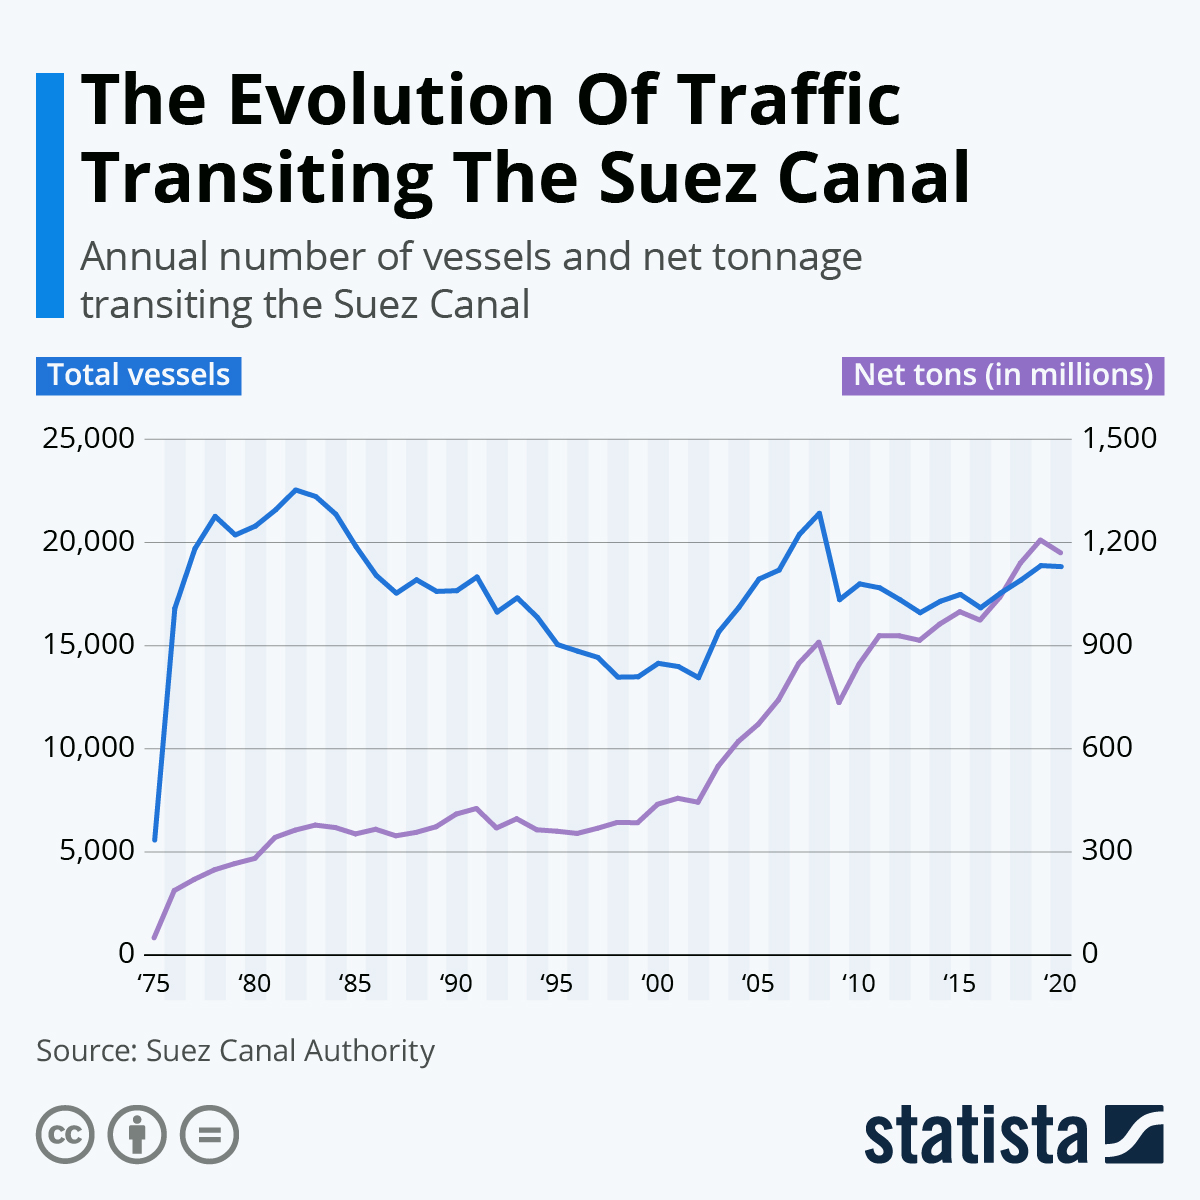 The Evolution Of Traffic Transiting The Suez Canal